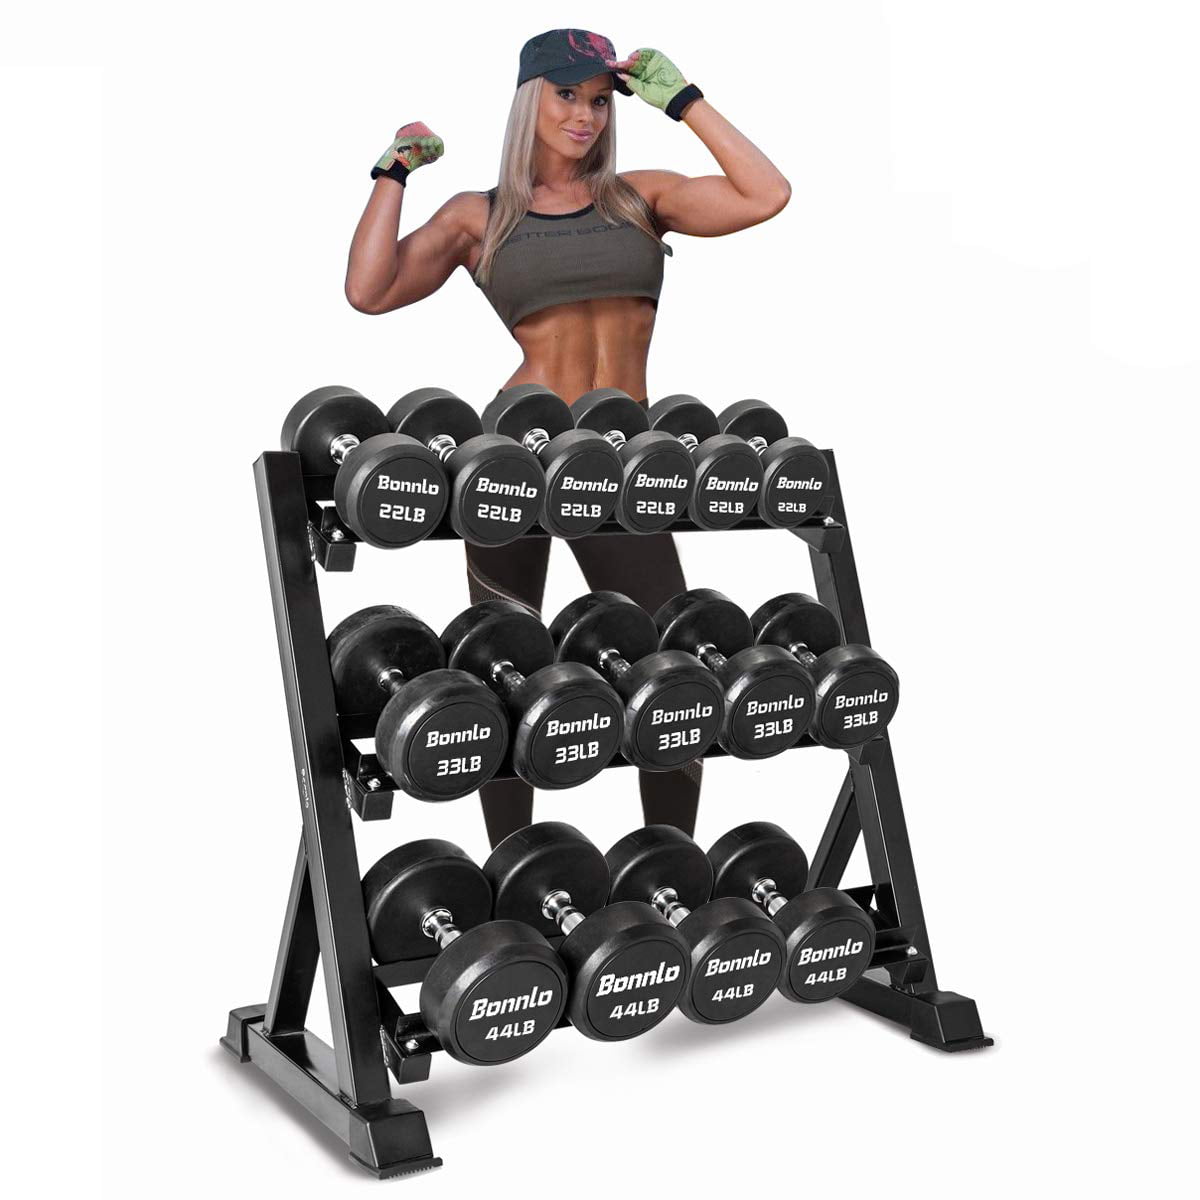 3-Tier Dumbbell Weight Lifting Rack Stand Tree Fitness Dumbell Holder Storage c6 